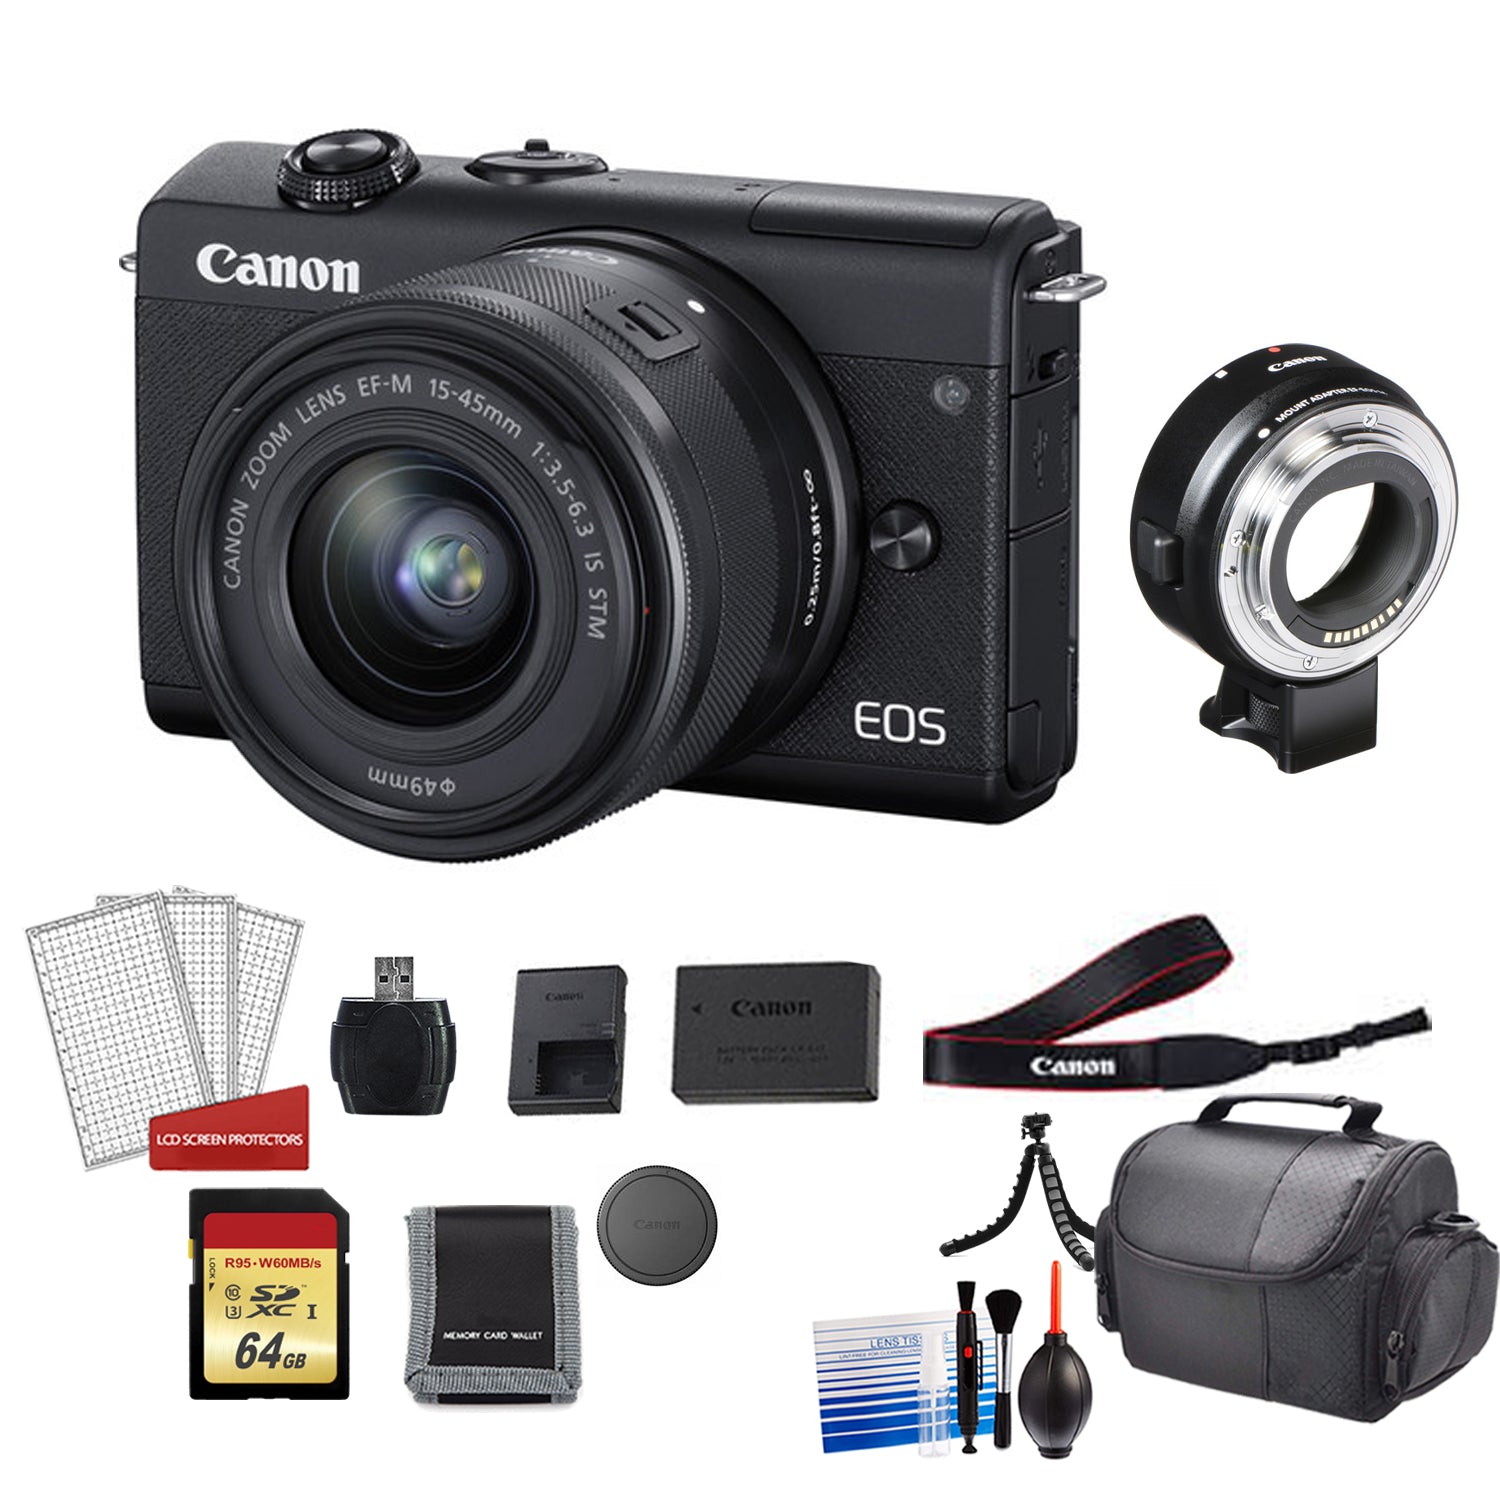 Canon EOS M200 with 15-45mm Lens Kit with Lens Adapter - International Model Base Bundle